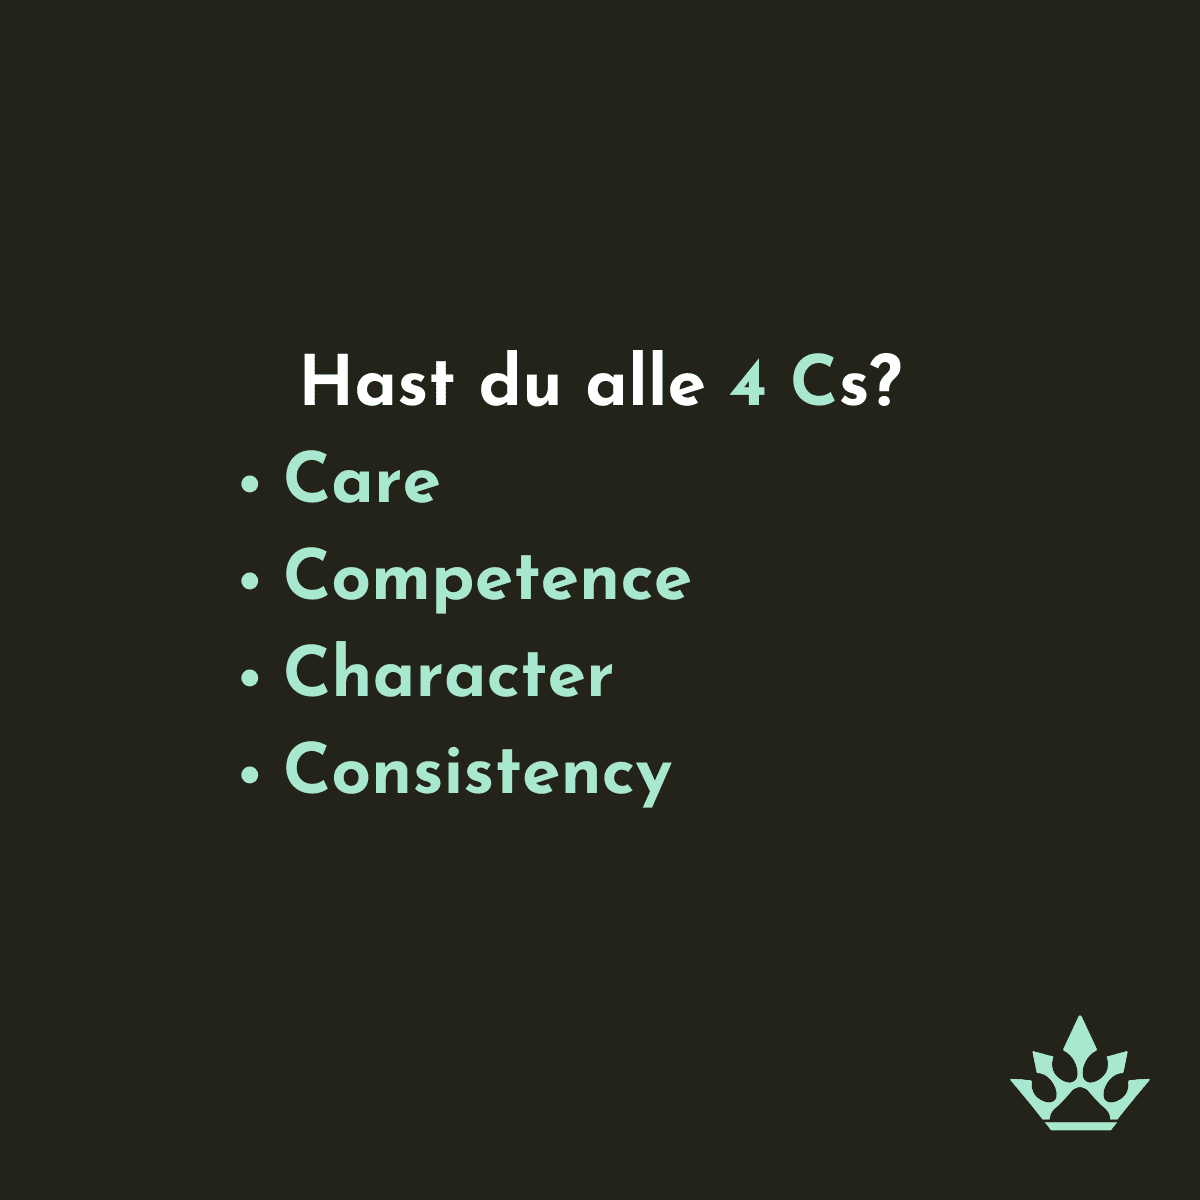 Bild zeigt Text: "Hast du alle 4 Cs? Care, Competence, Character, Consistency"